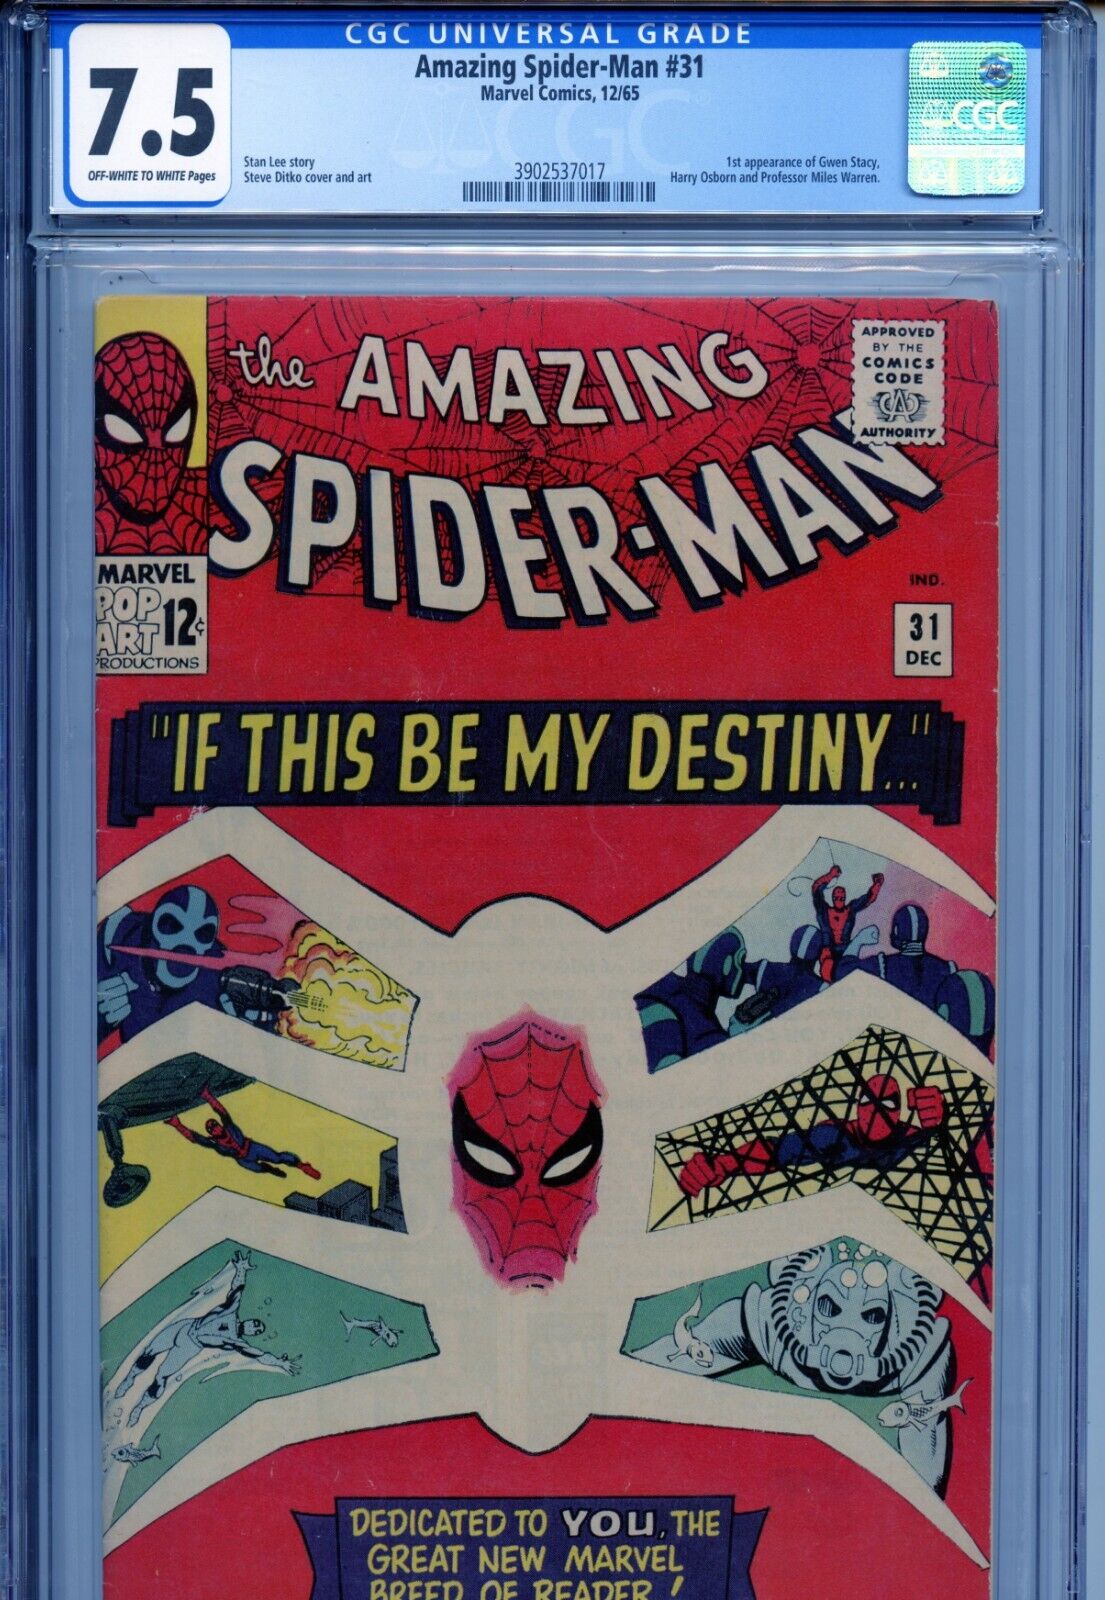 1965 MARVEL AMAZING SPIDERMAN 31 1ST APPEARANCE OF GWEN STACY CGC 75